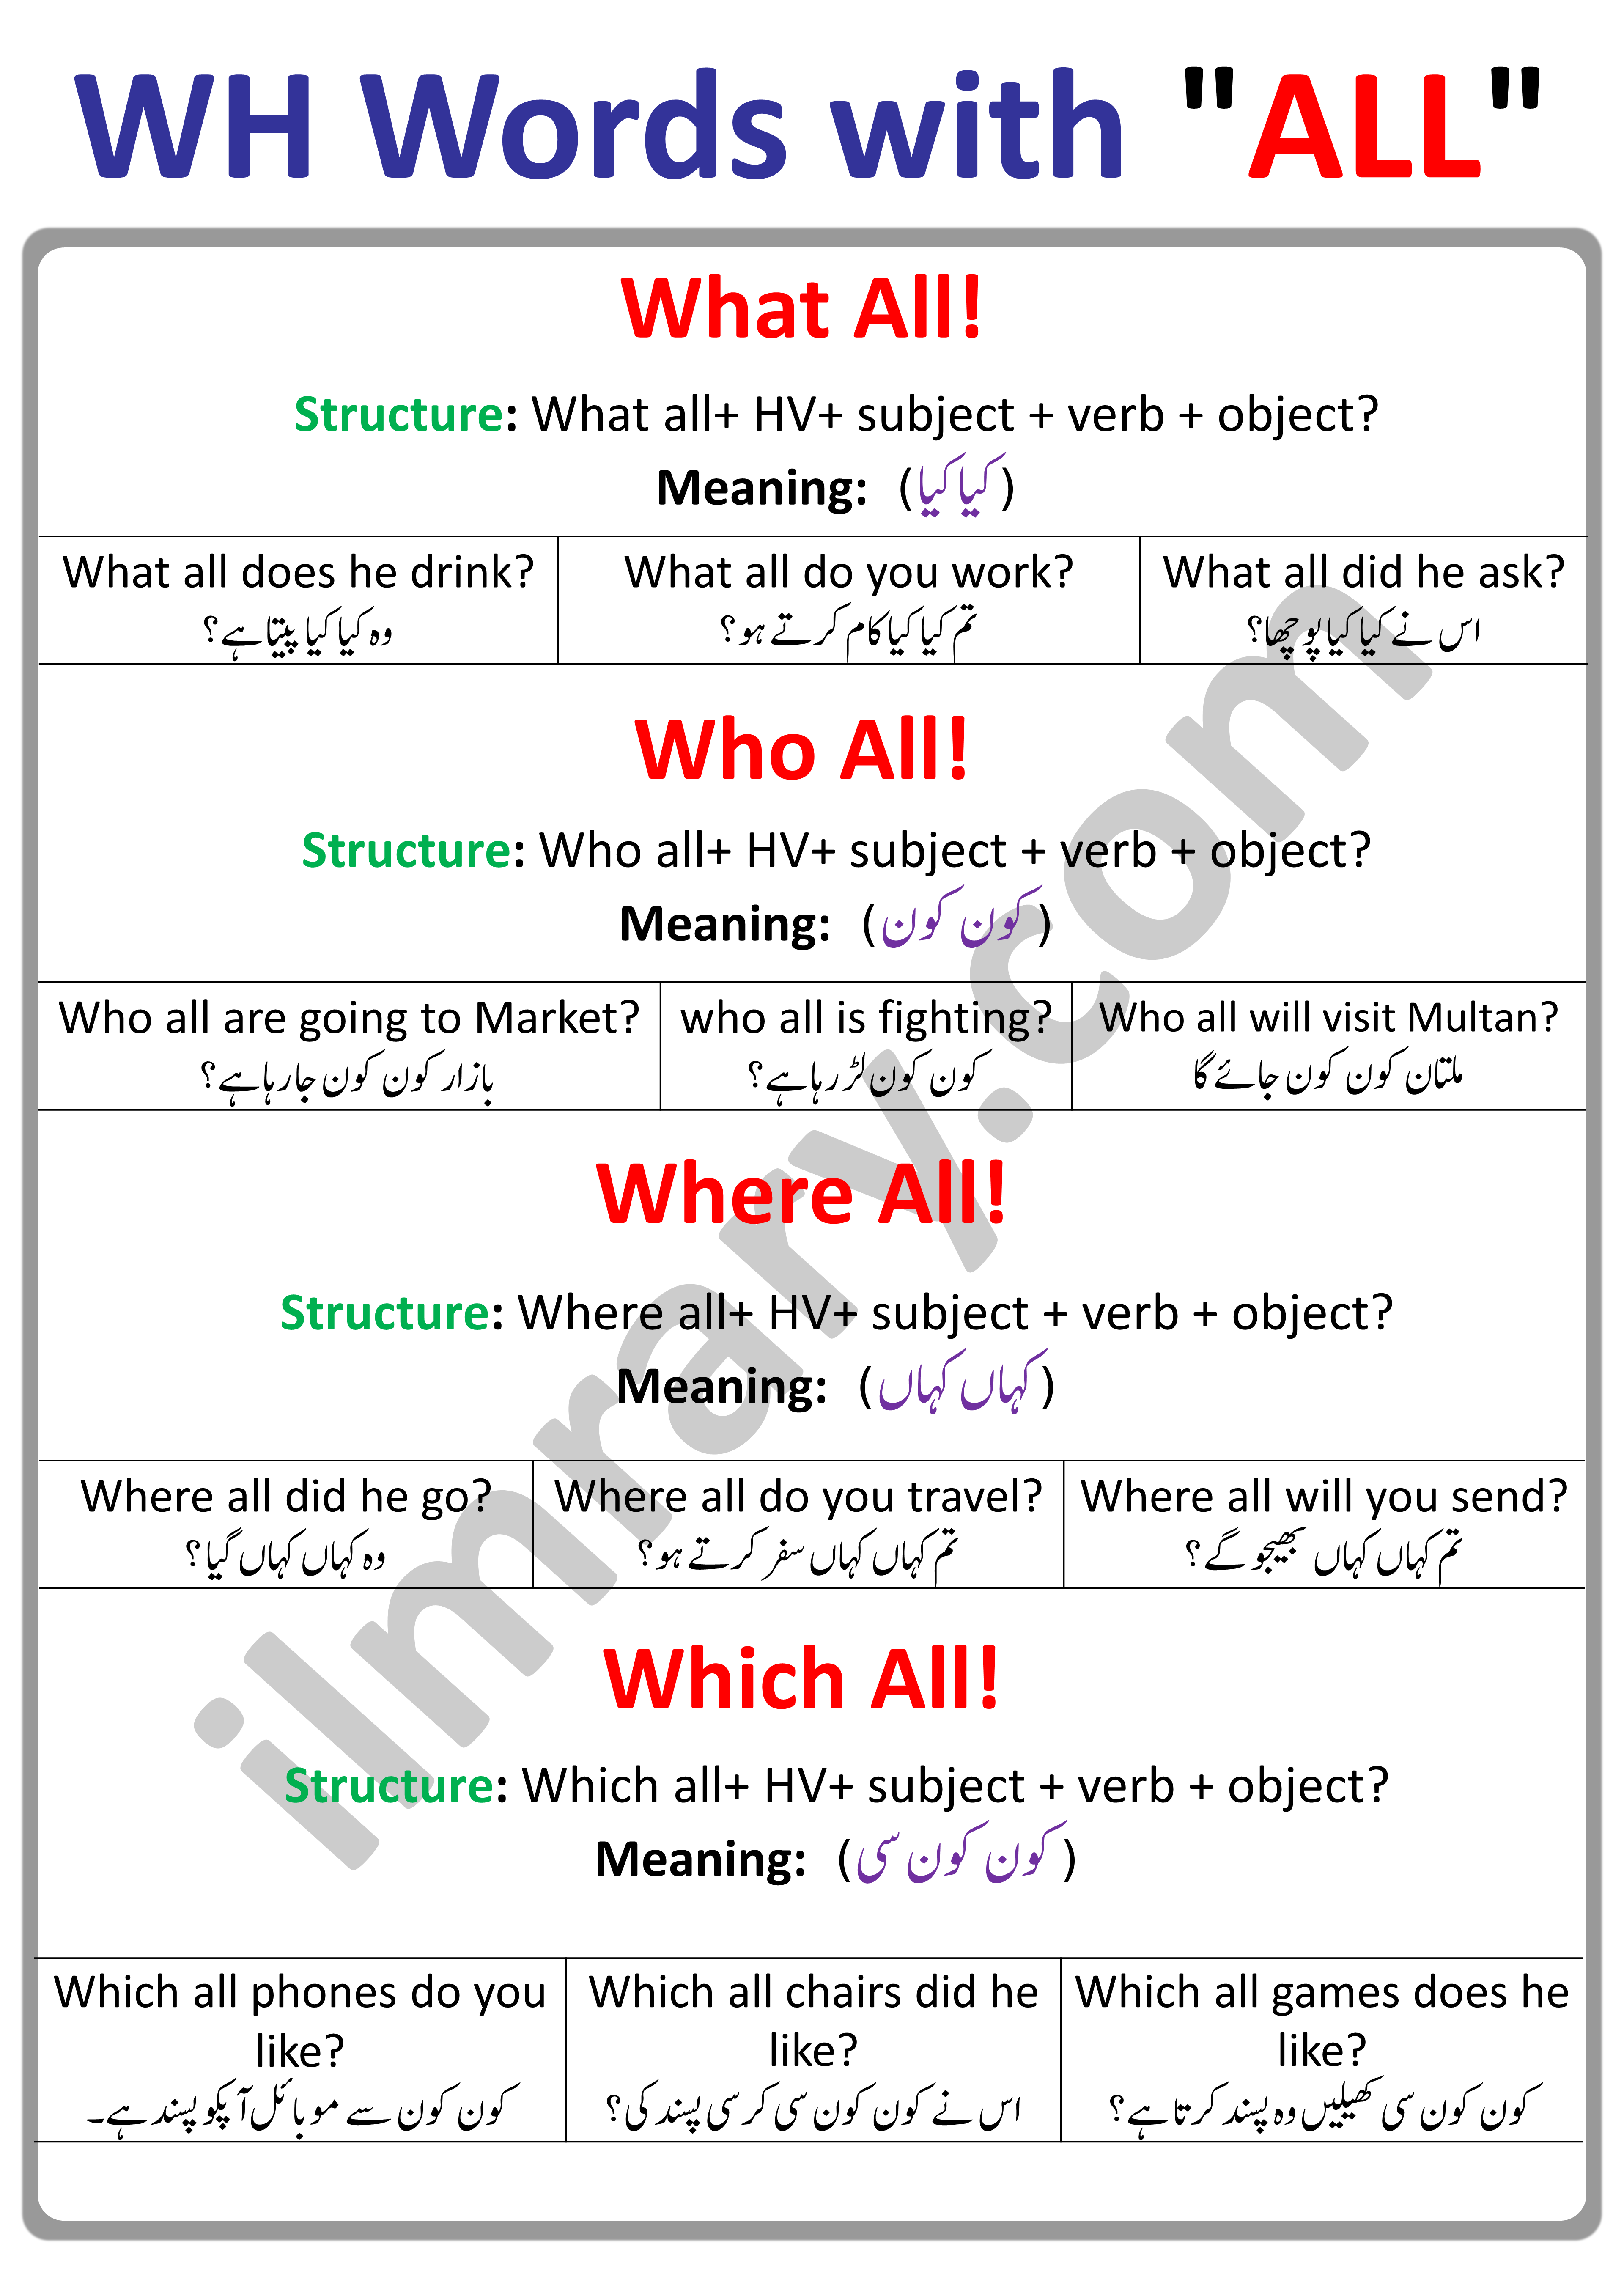 Learn WH Family Words Using "ALL" with Examples in Urdu